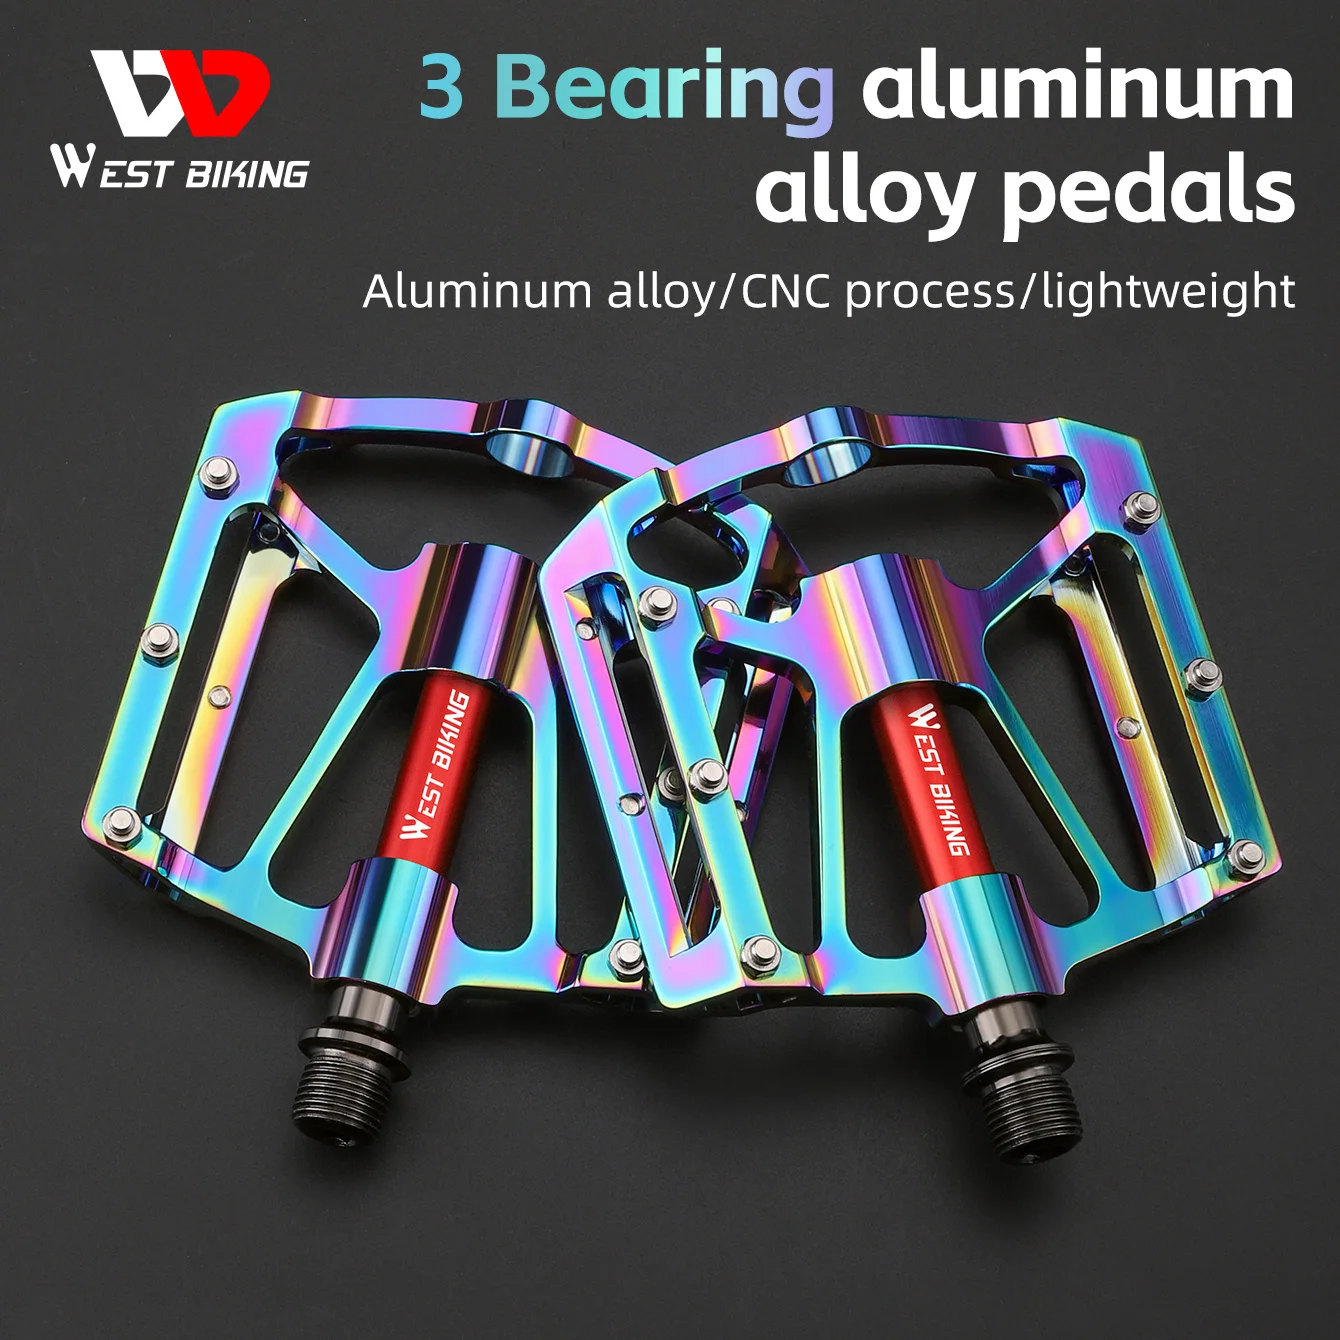 

WEST BIKING Bicycle Ultralight Pedals 3 Bearings MTB 7075 Aluminum Alloy Flat Pedals Road Bike Non-Slip Colorful Cycling Pedals